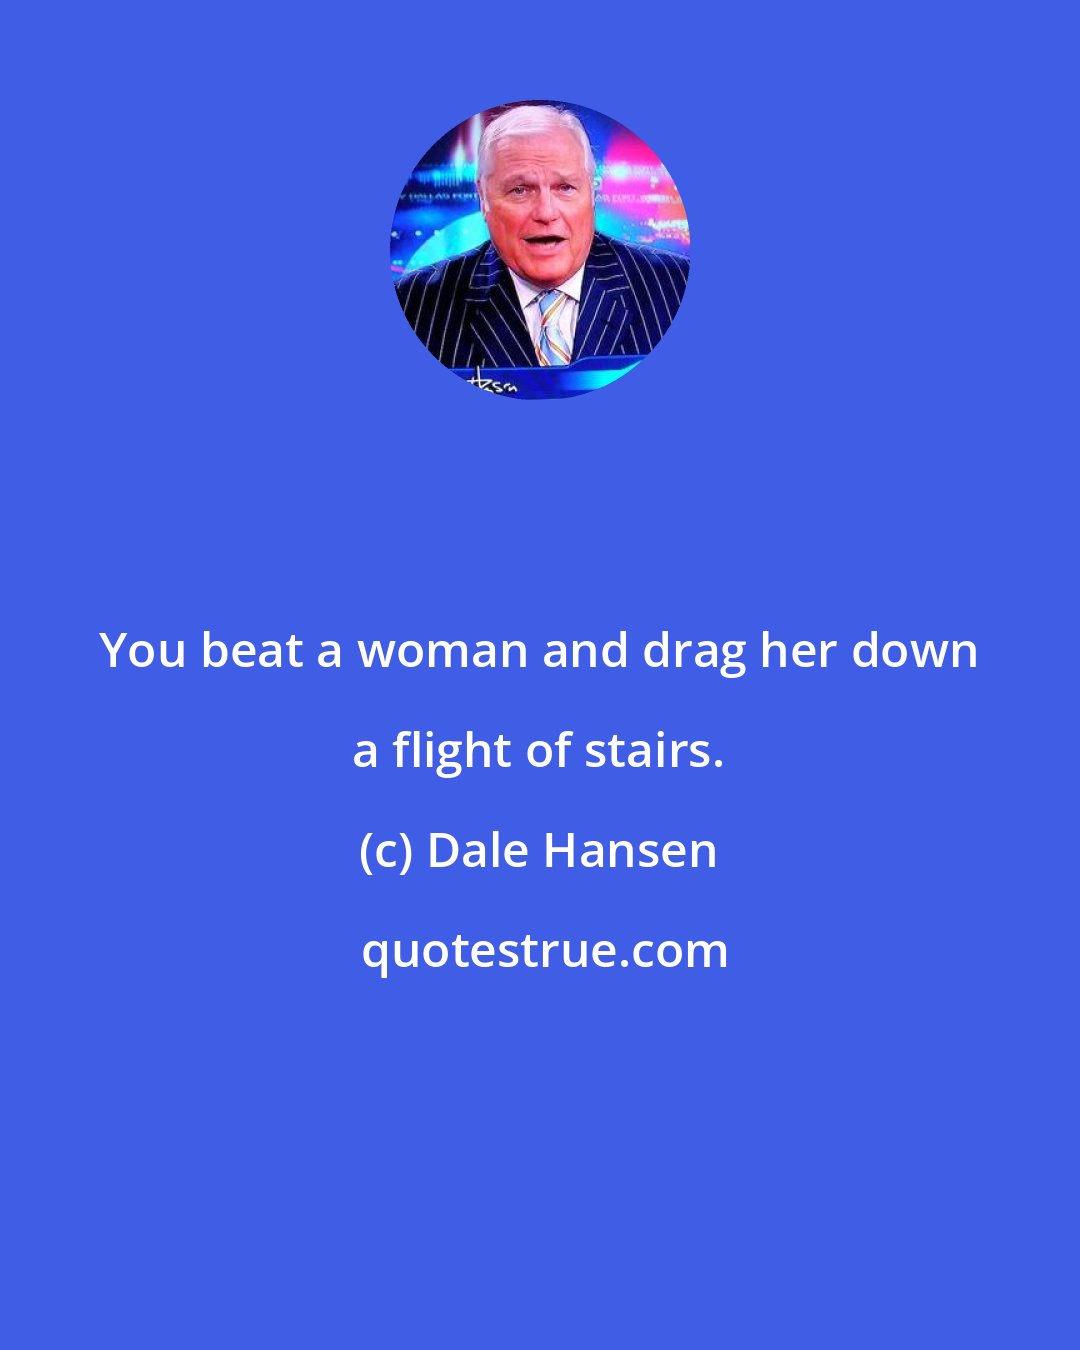 Dale Hansen: You beat a woman and drag her down a flight of stairs.